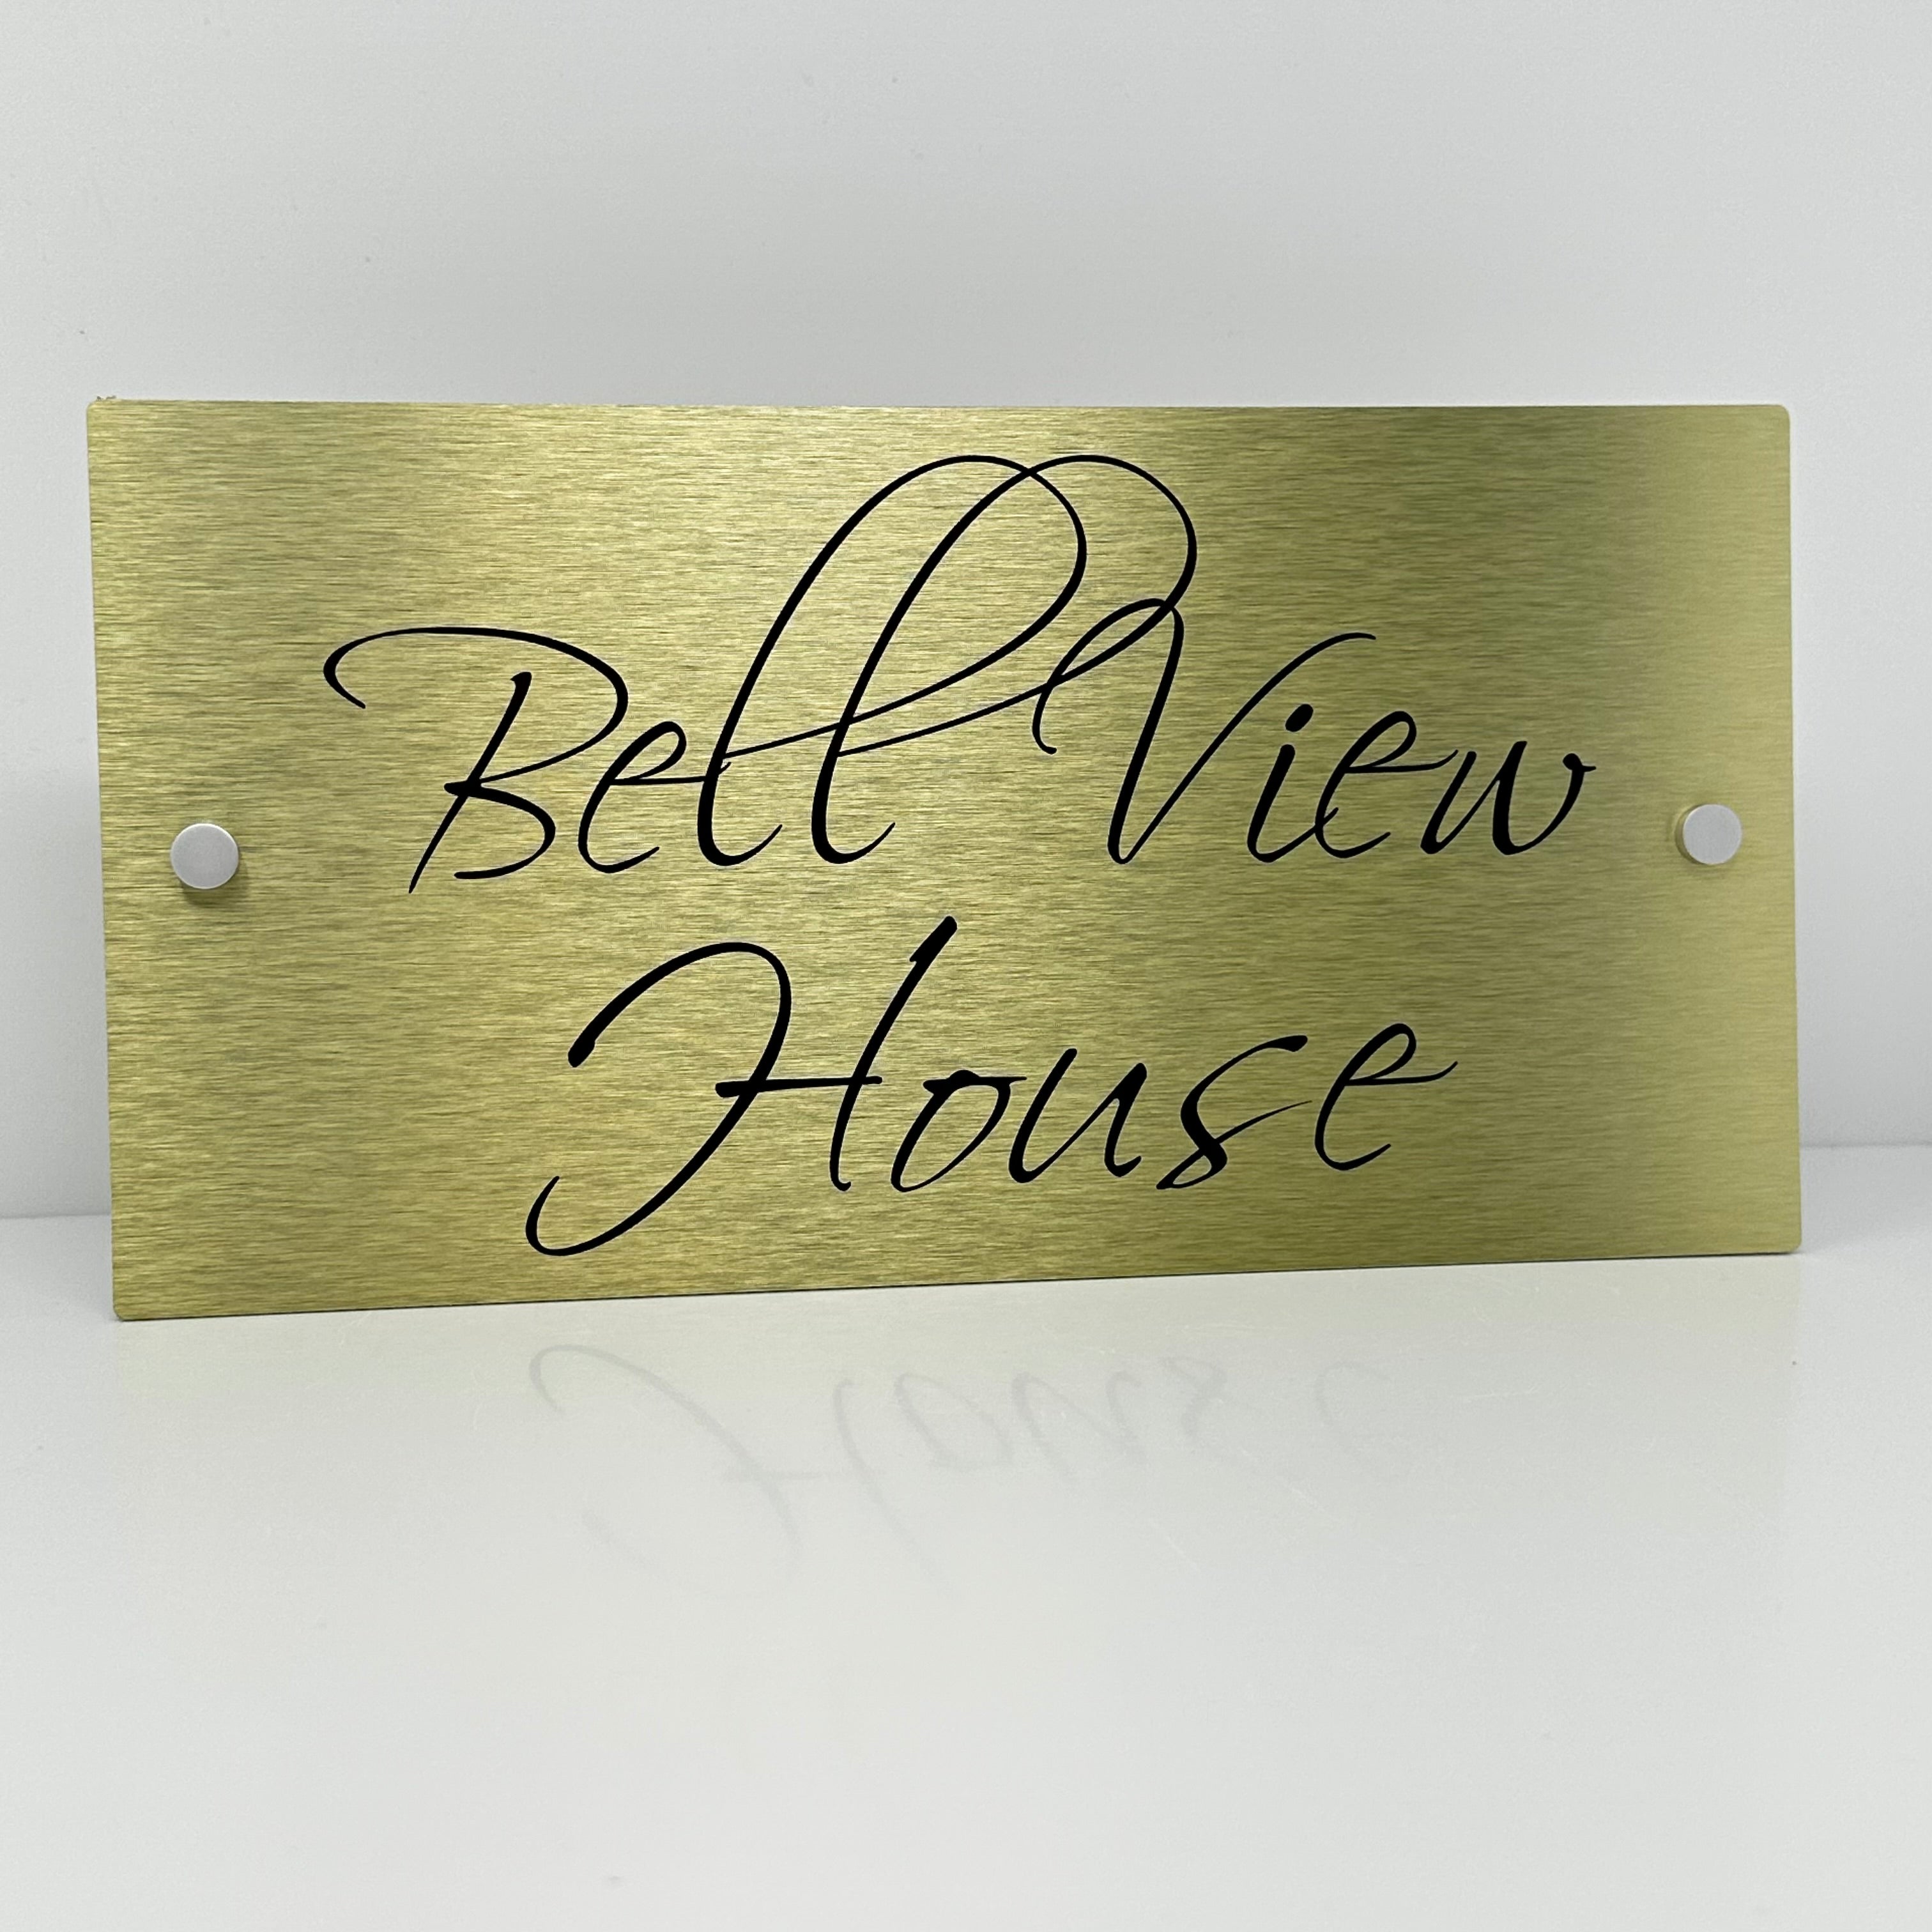 The Bell View Modern House Sign with a Brushed Gold Panel and Satin Silver Stand Off Fixings ( Size - 35cm x 18cm )